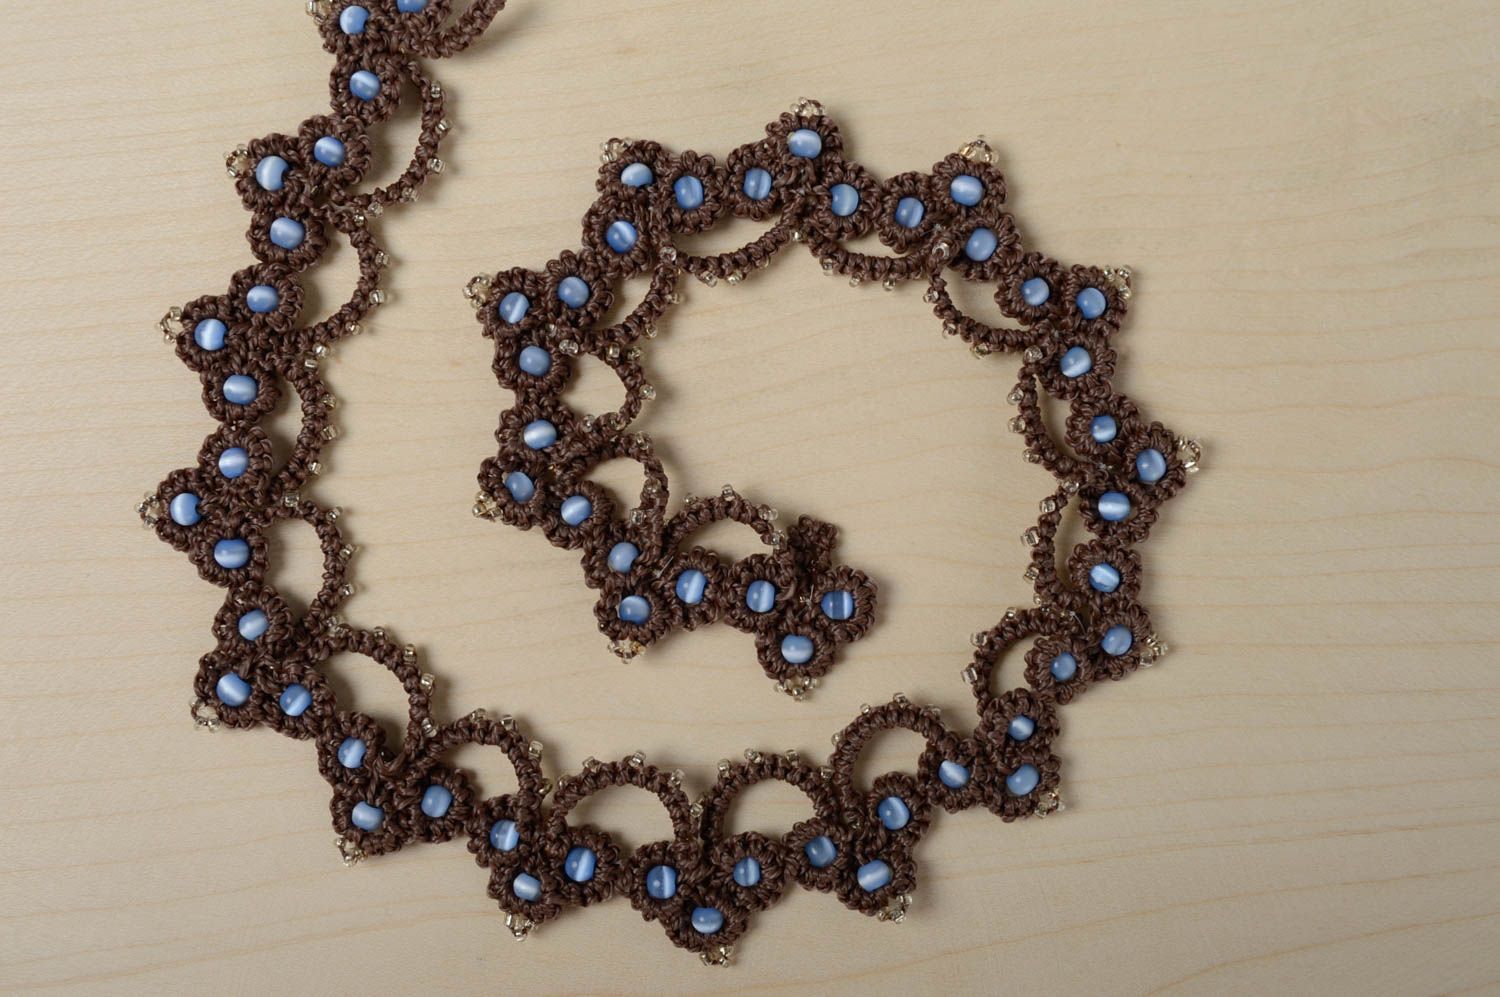 Evening necklace made using tatting technique photo 1